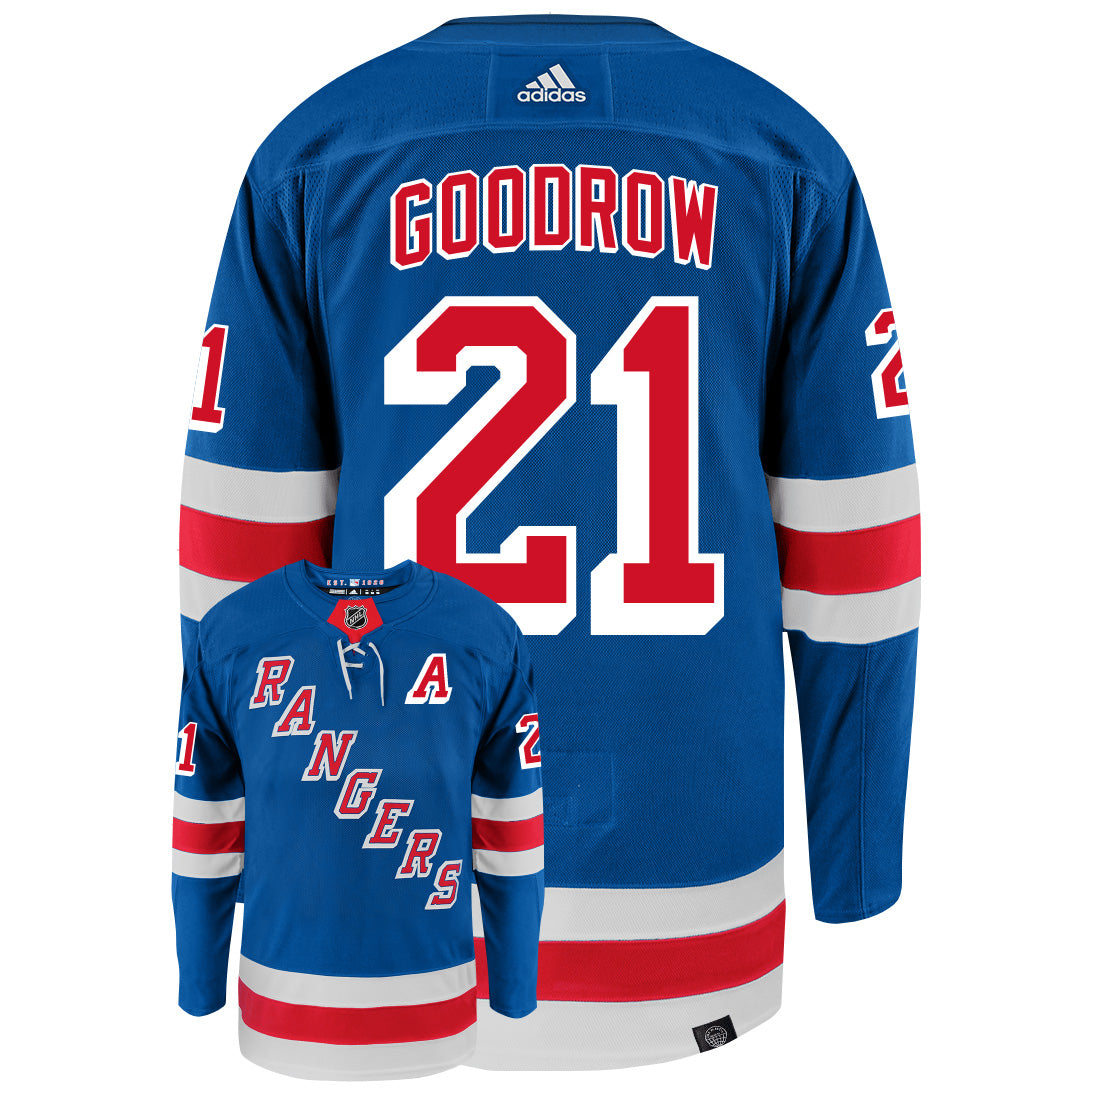 Barclay Goodrow New York Rangers Adidas Primegreen Authentic Home NHL Hockey Jersey - Back/Front View